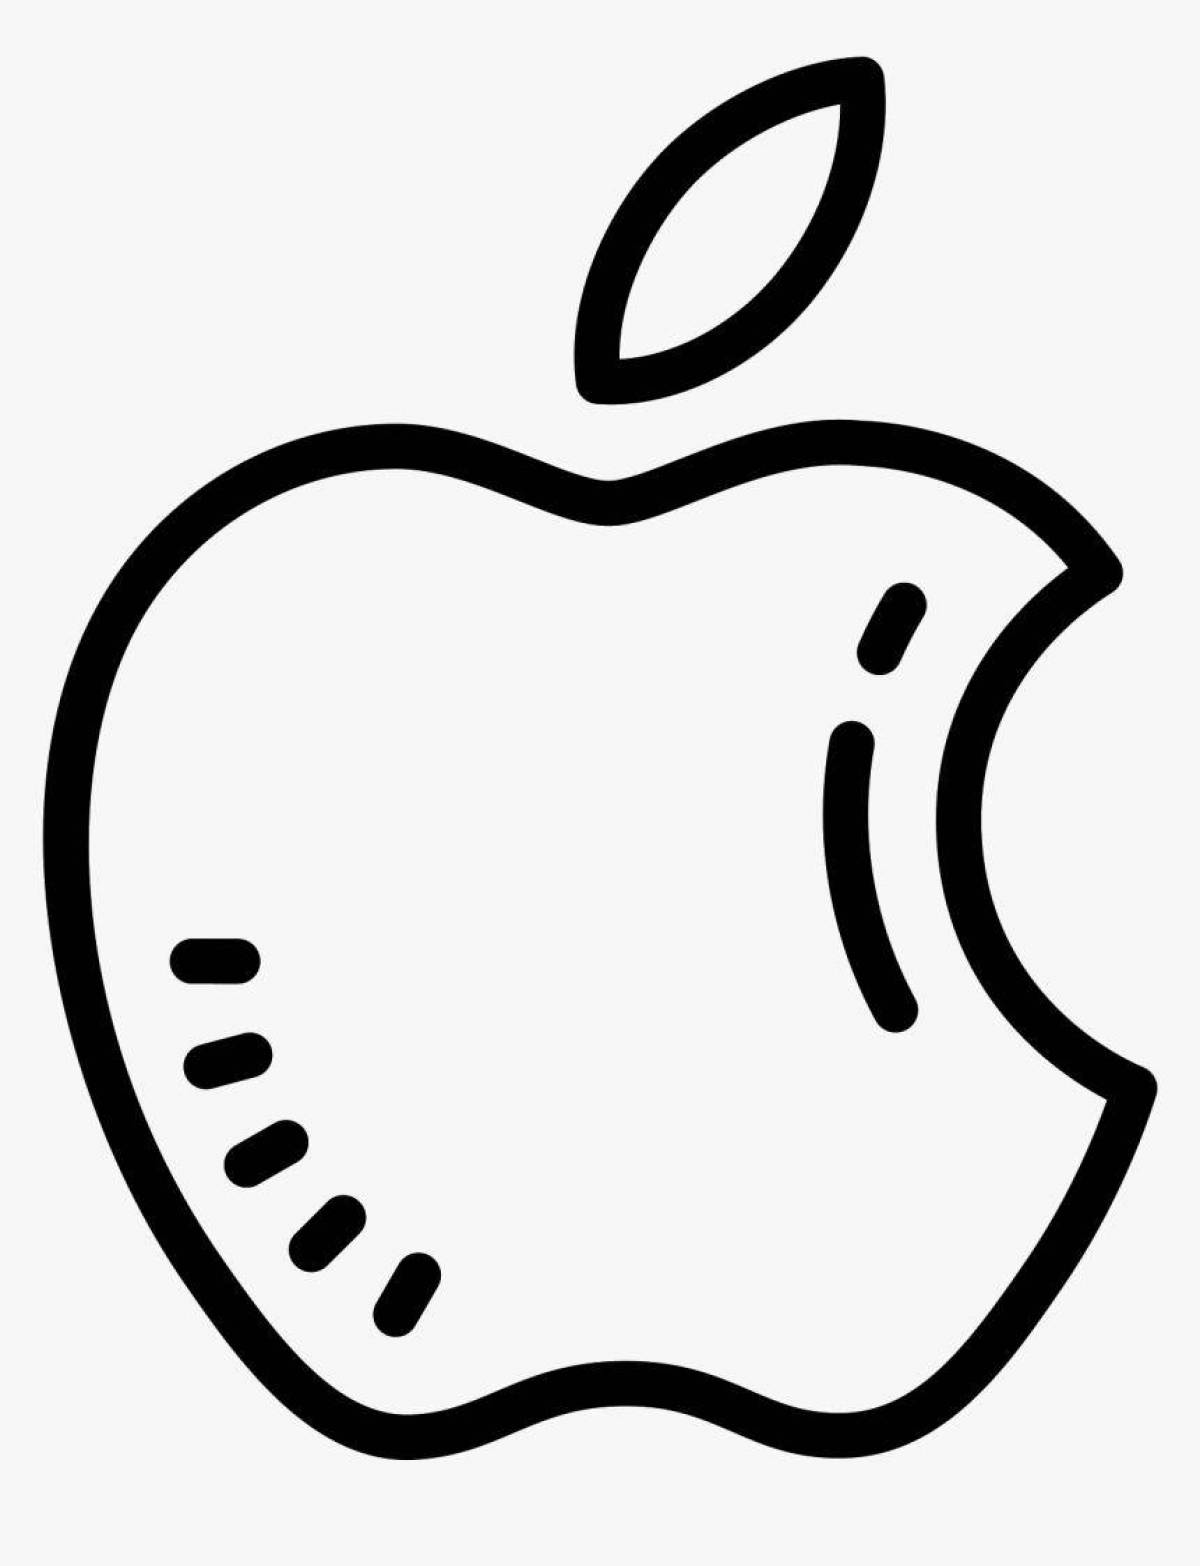 Coloring page with sparkling apple icon